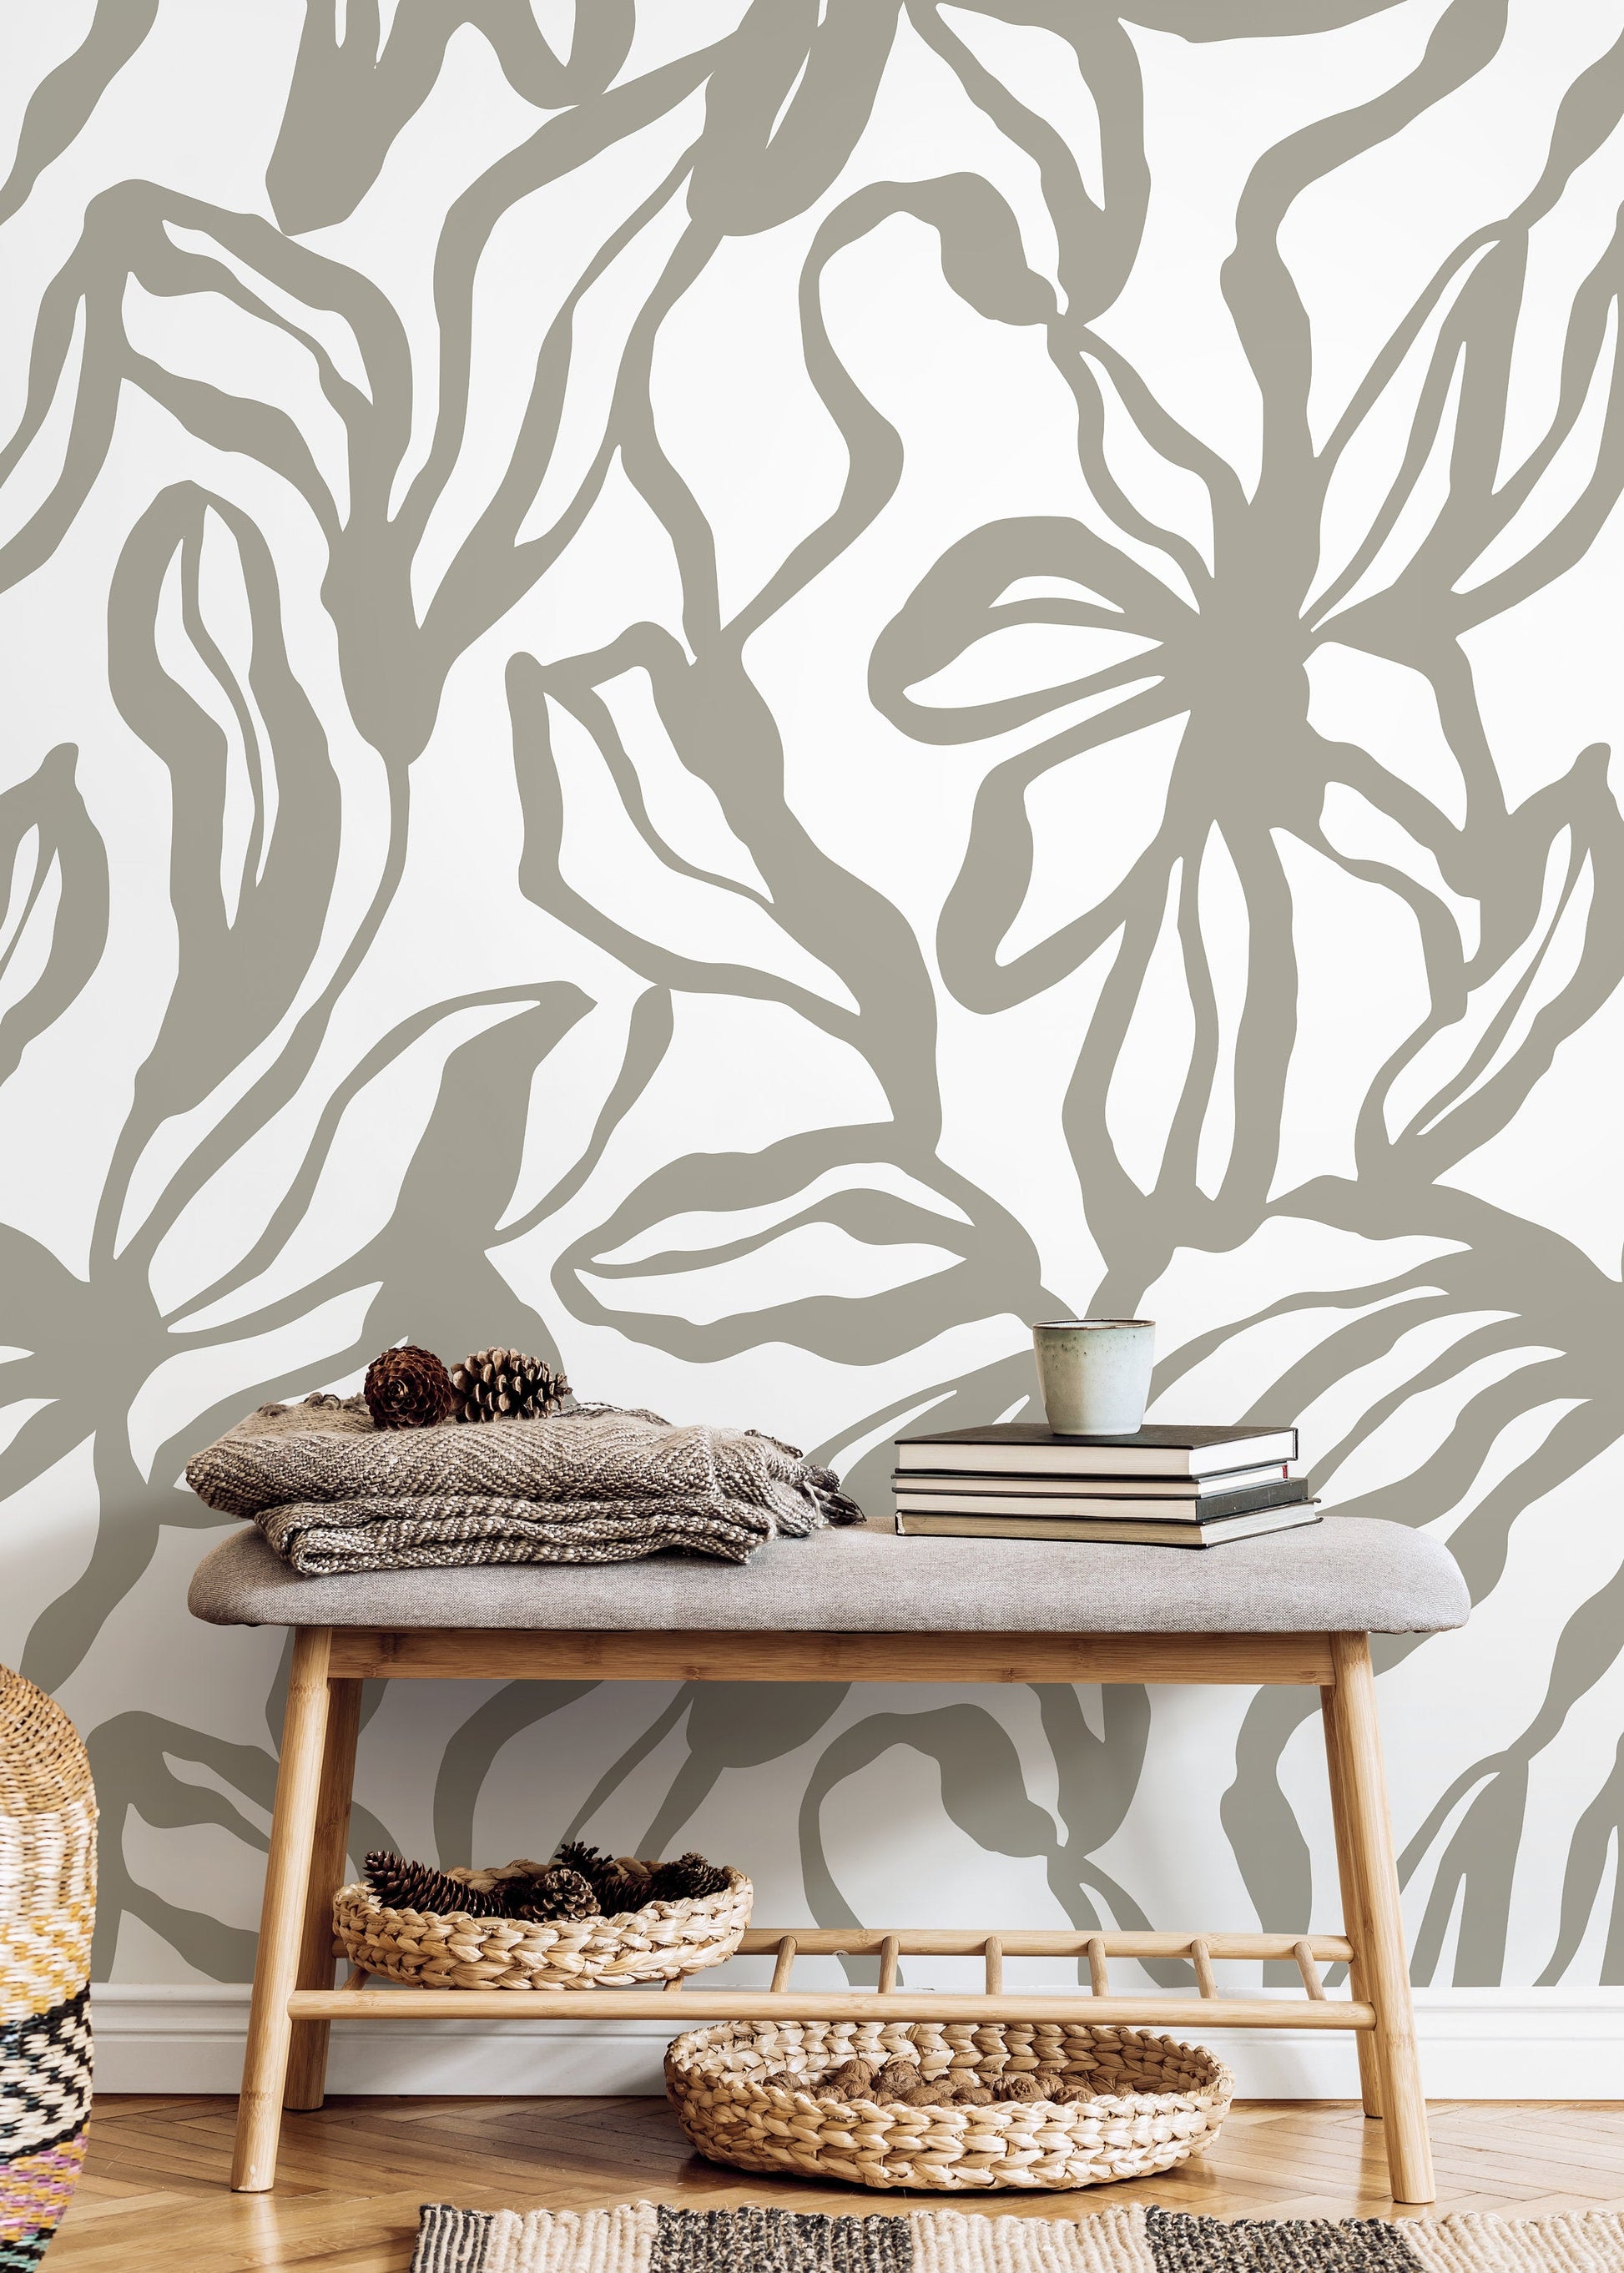 Gray Abstract Floral Wallpaper / Peel and Stick Wallpaper Removable Wallpaper Home Decor Wall Art Wall Decor Room Decor - D287